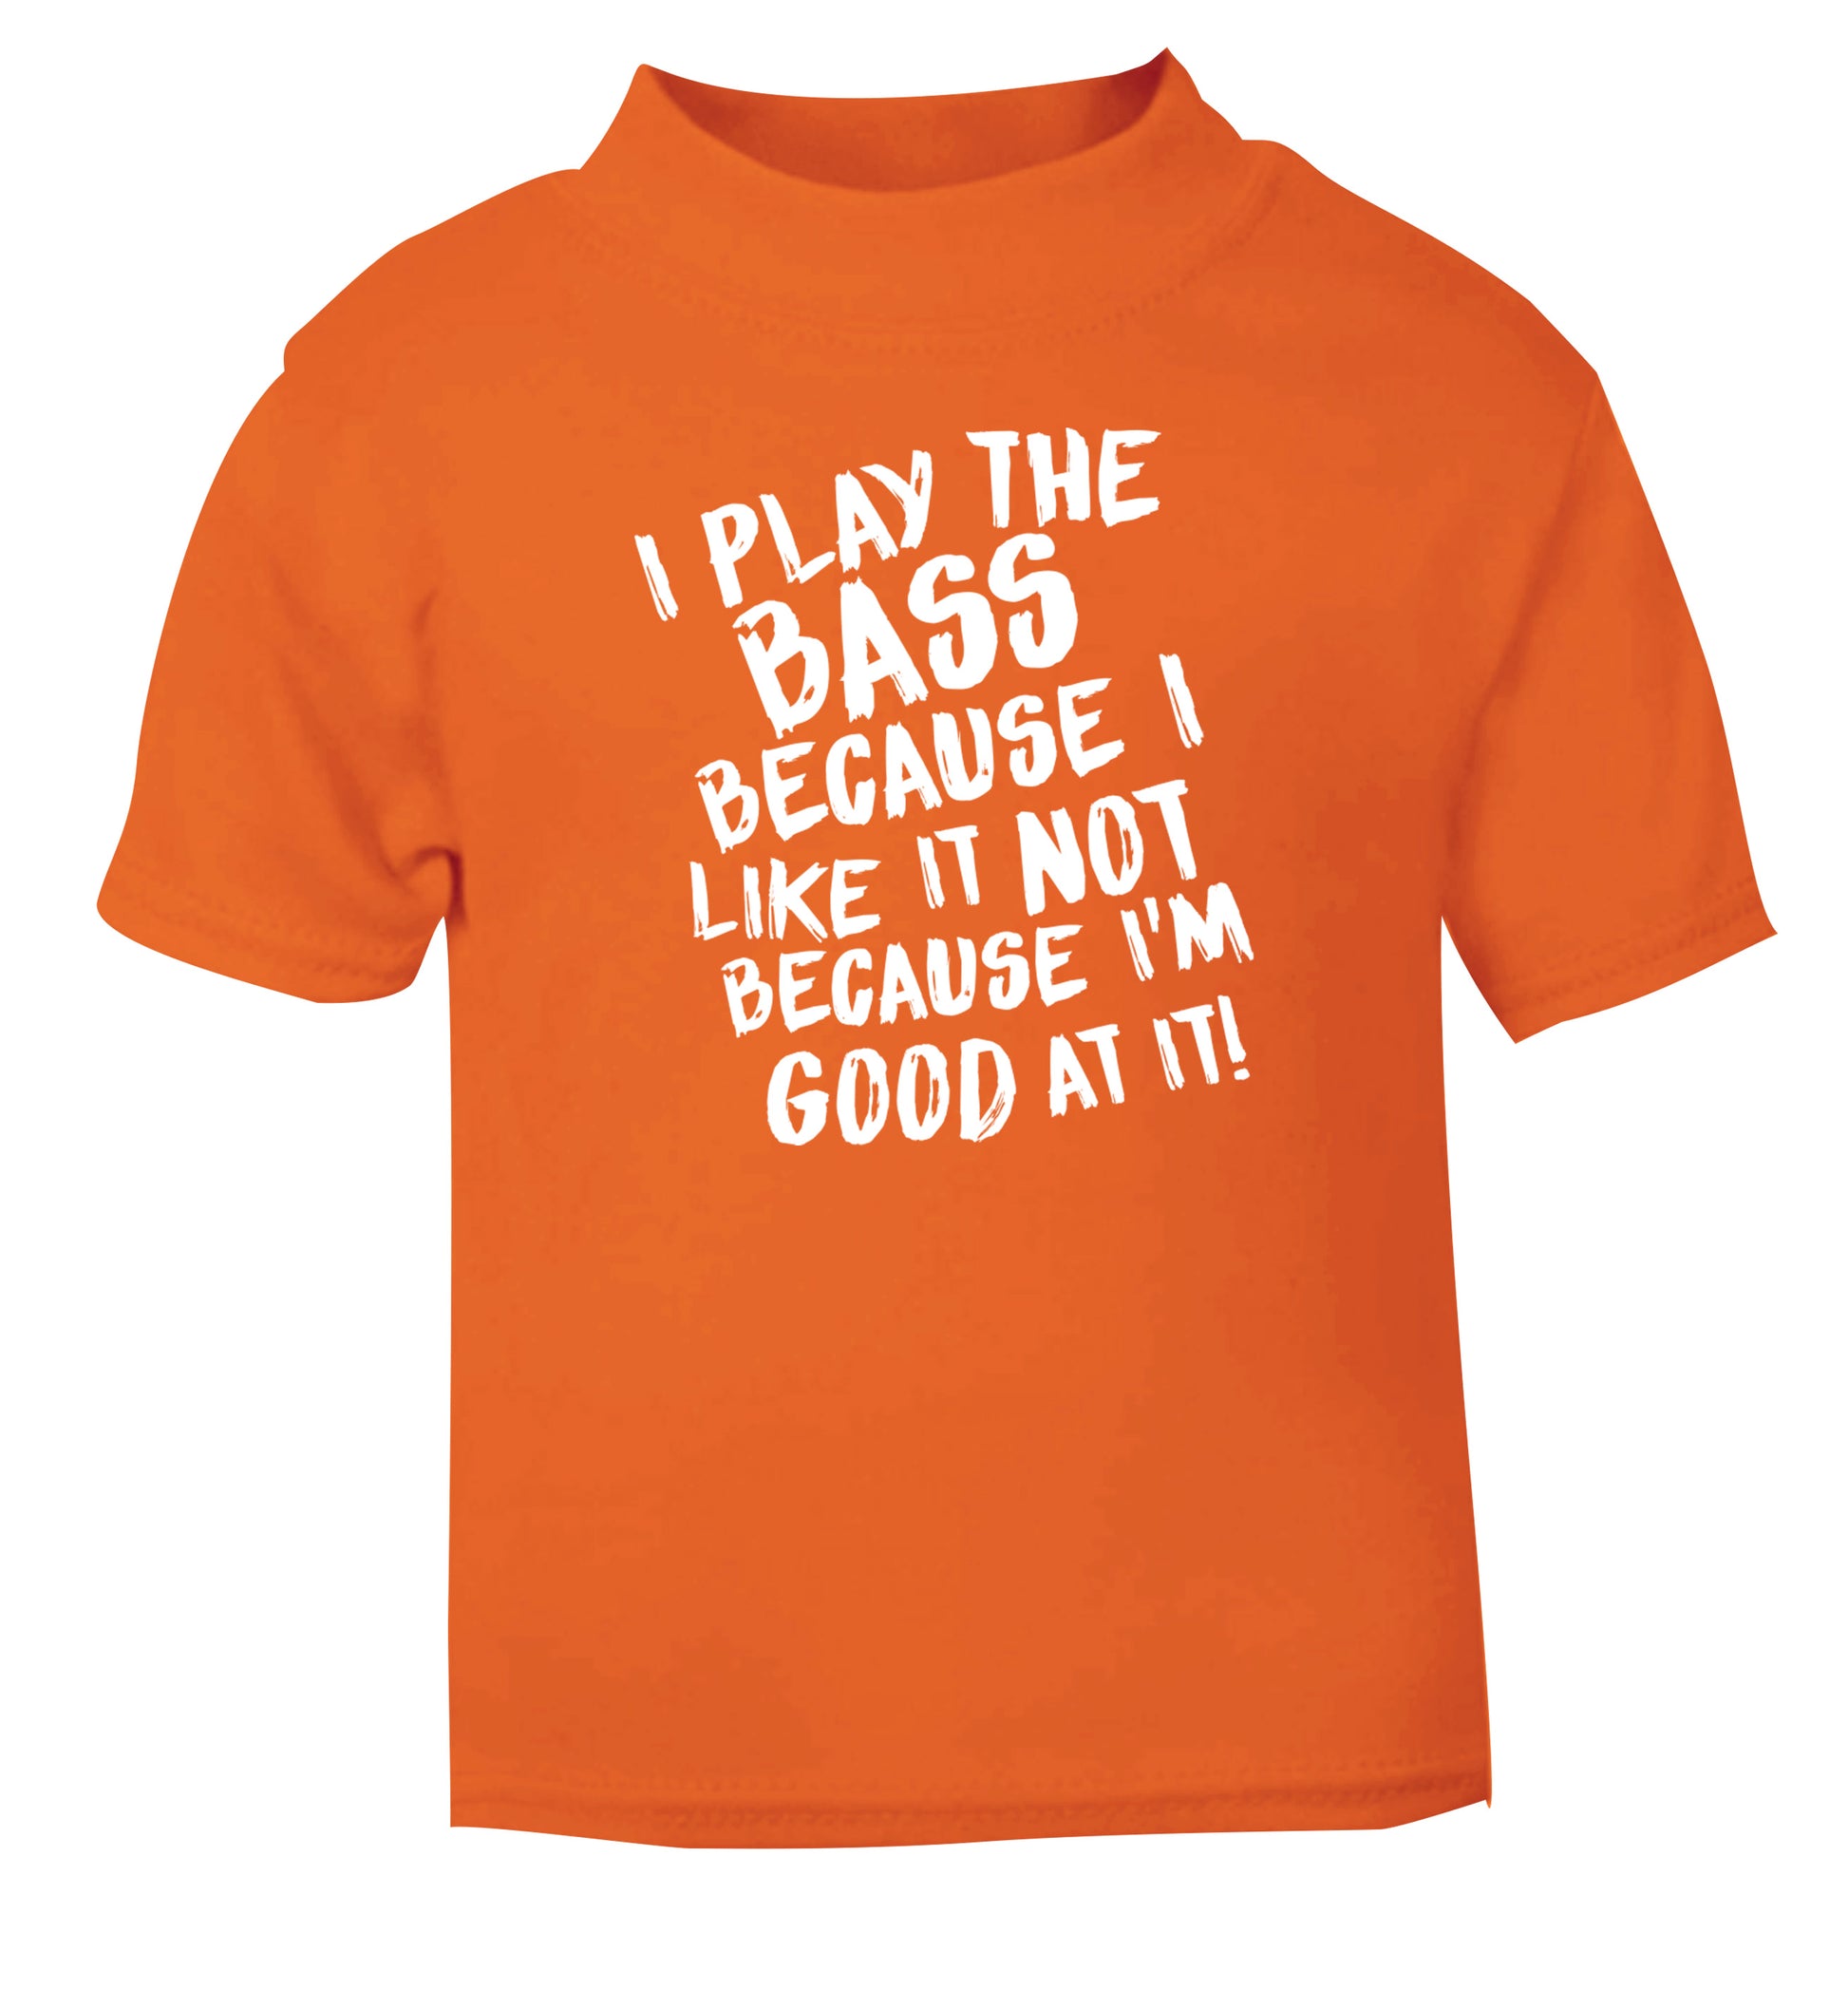 I play the bass because I like it not because I'm good at it orange Baby Toddler Tshirt 2 Years